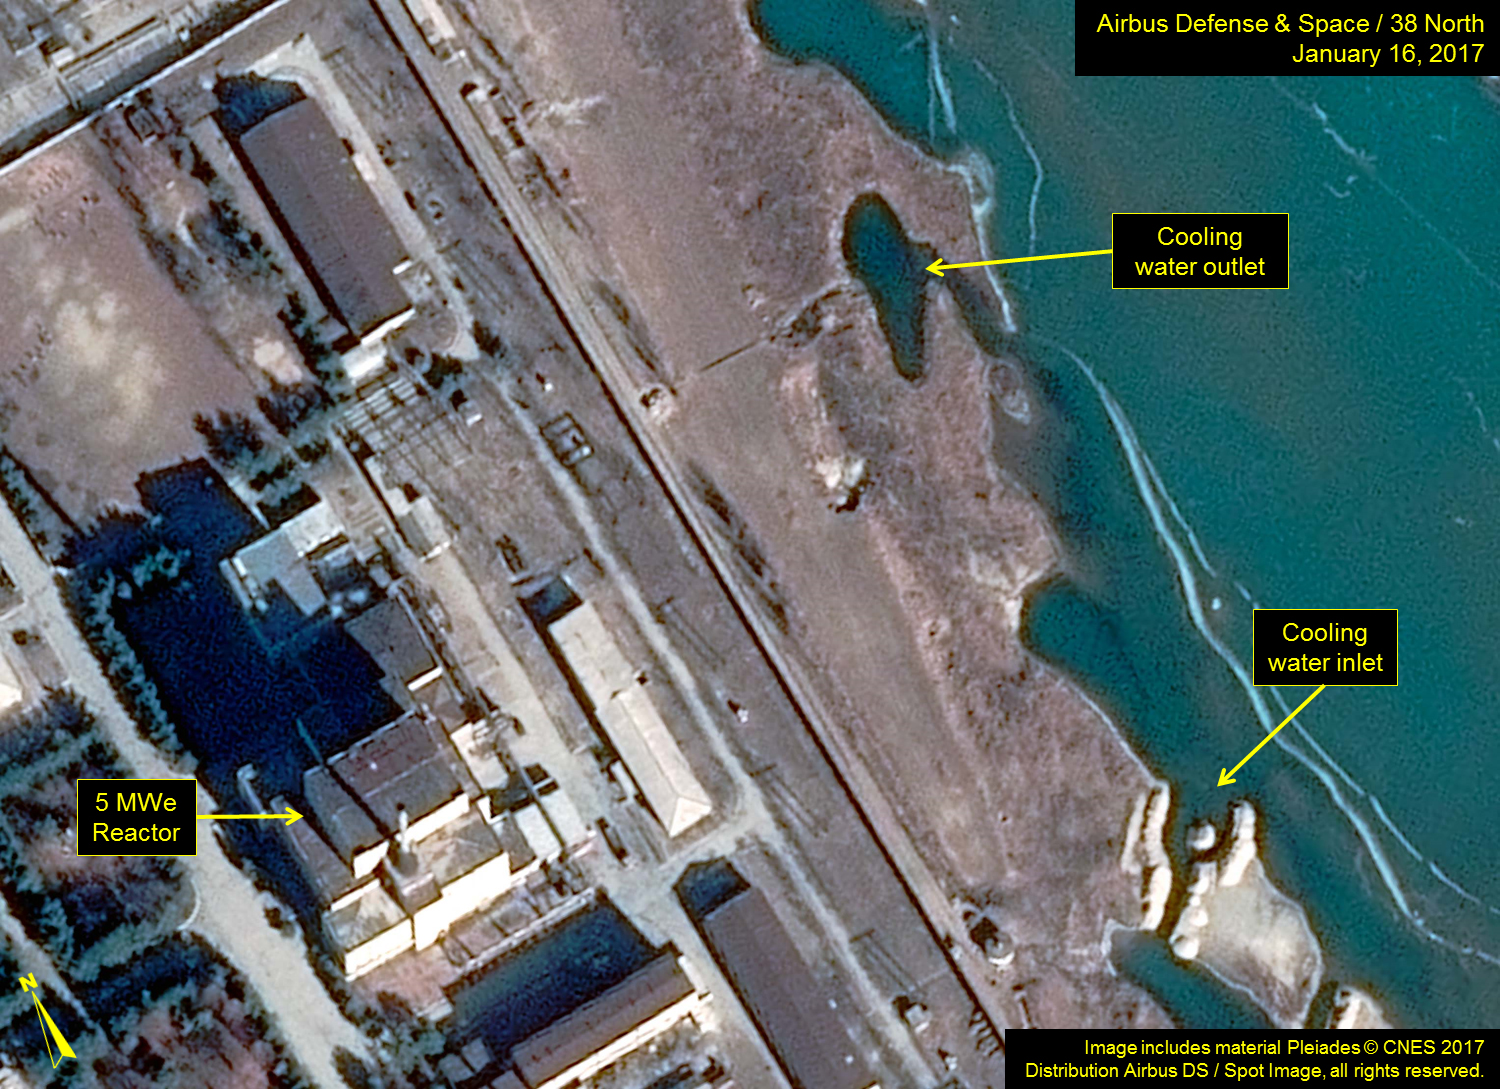 North Korea’s Yongbyon Nuclear Facility: Operations Resume at the 5 MWe Plutonium Production Reactor